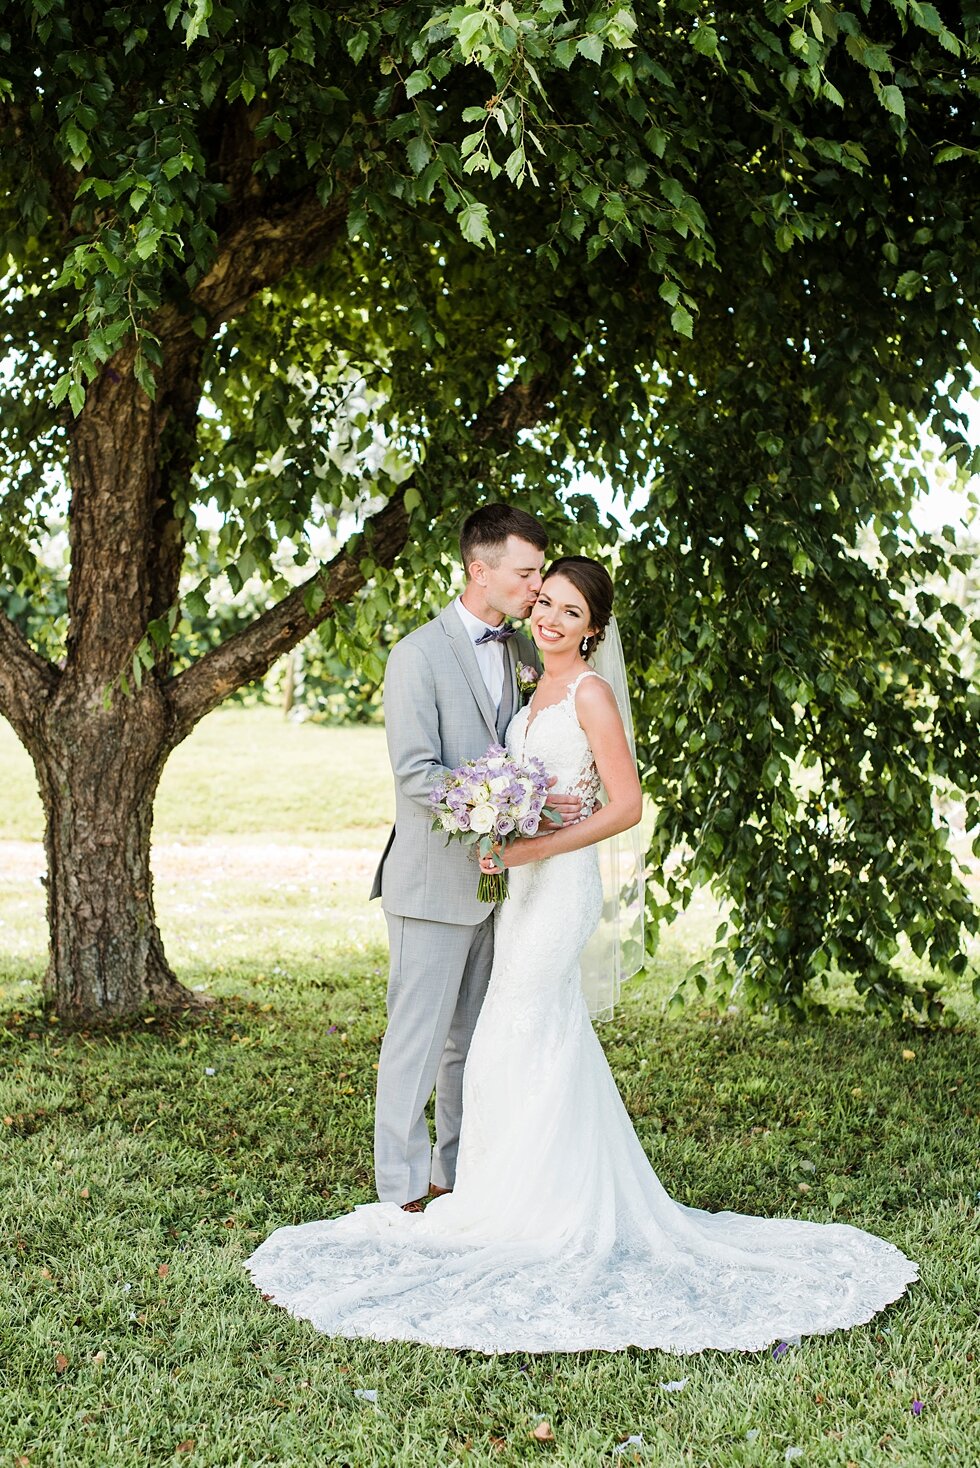  Bride and groom posing together with the gorgeous trees and leaves behind them. wedding ceremony details stunning photography married midwest louisville kentucky #weddingphoto #love #justmarried #midwestphotographer #kywedding #louisville #kentuckyw